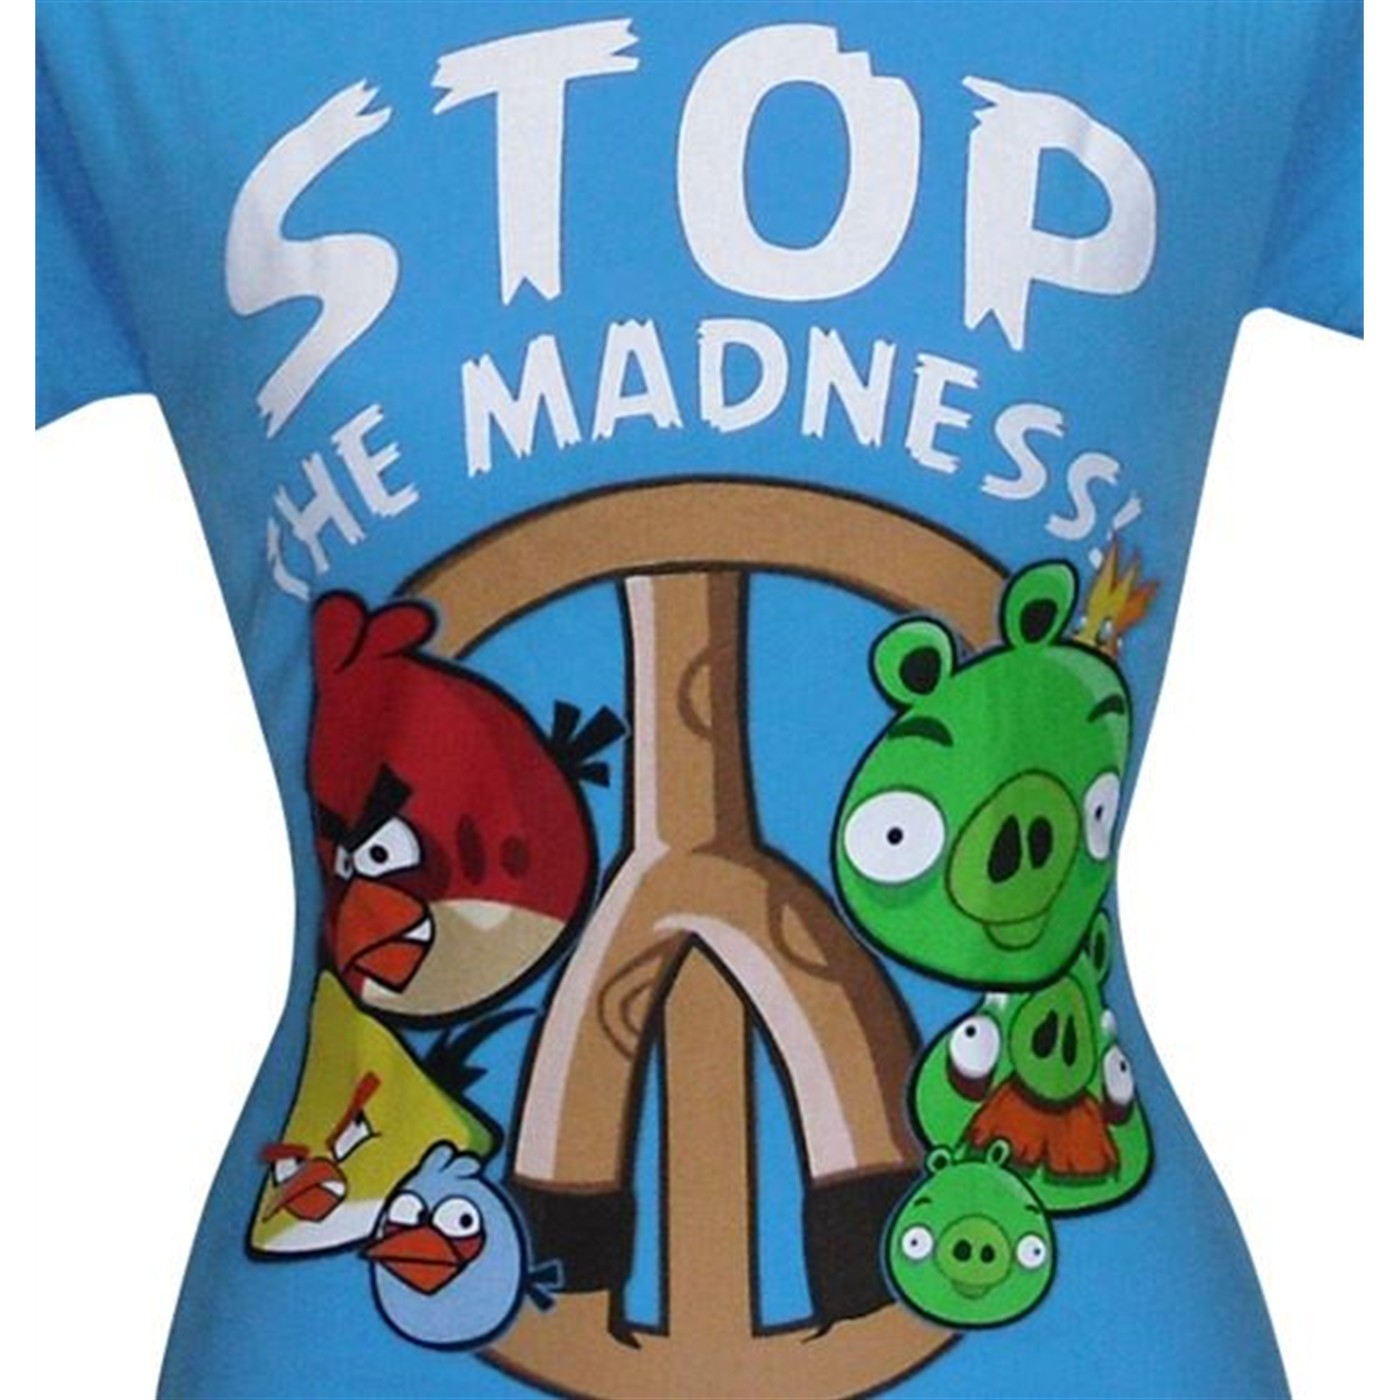 Angry Birds Women's Stop the Madness T-Shirt